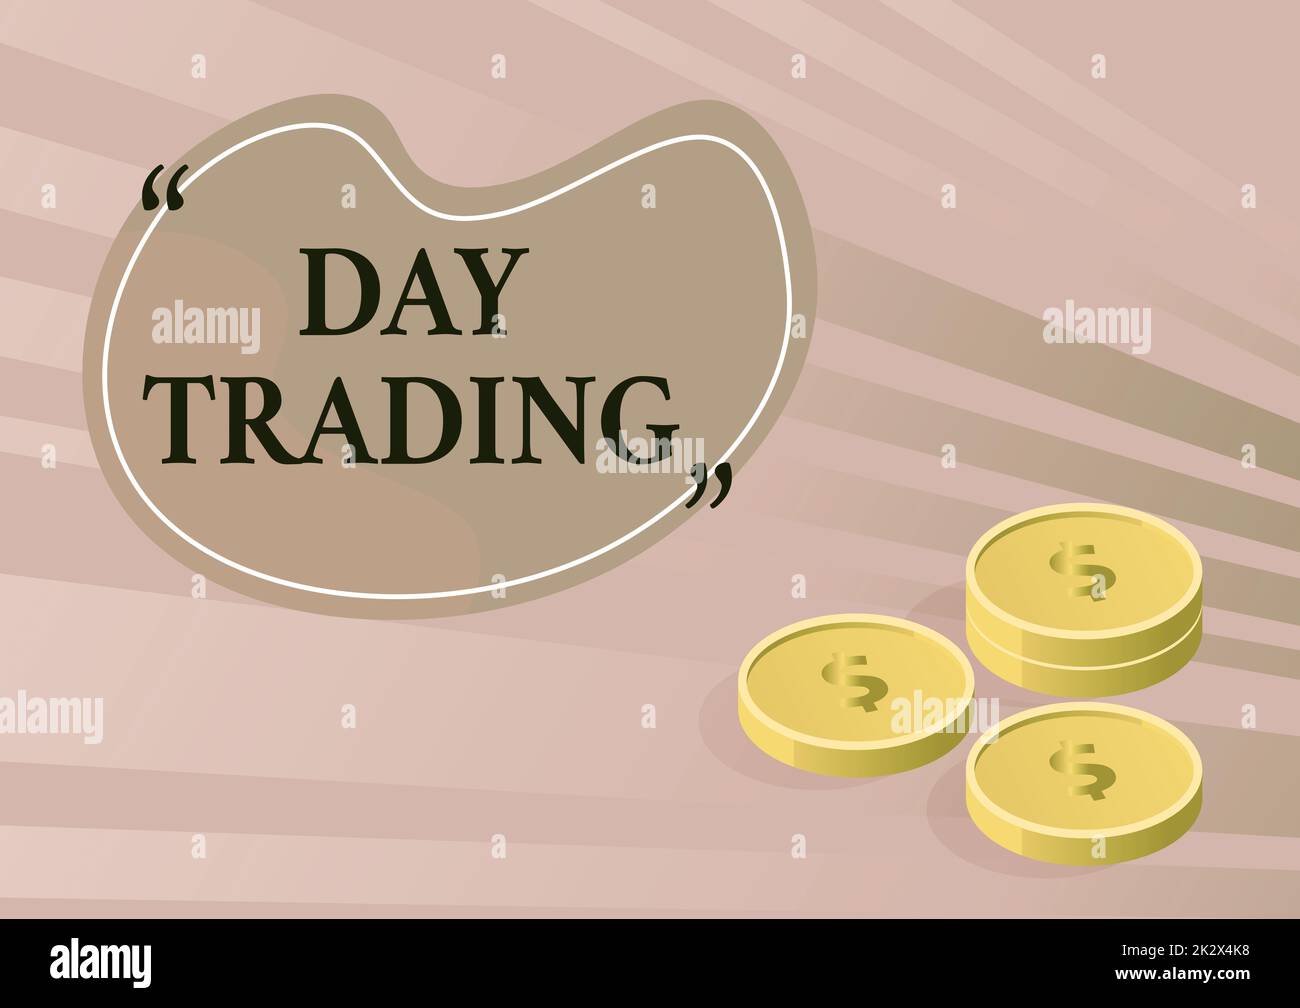 Writing displaying text Day Trading. Business overview securities specifically buying and selling financial instruments Coins symbolizing future financial plans successfully calculating mortgage. Stock Photo